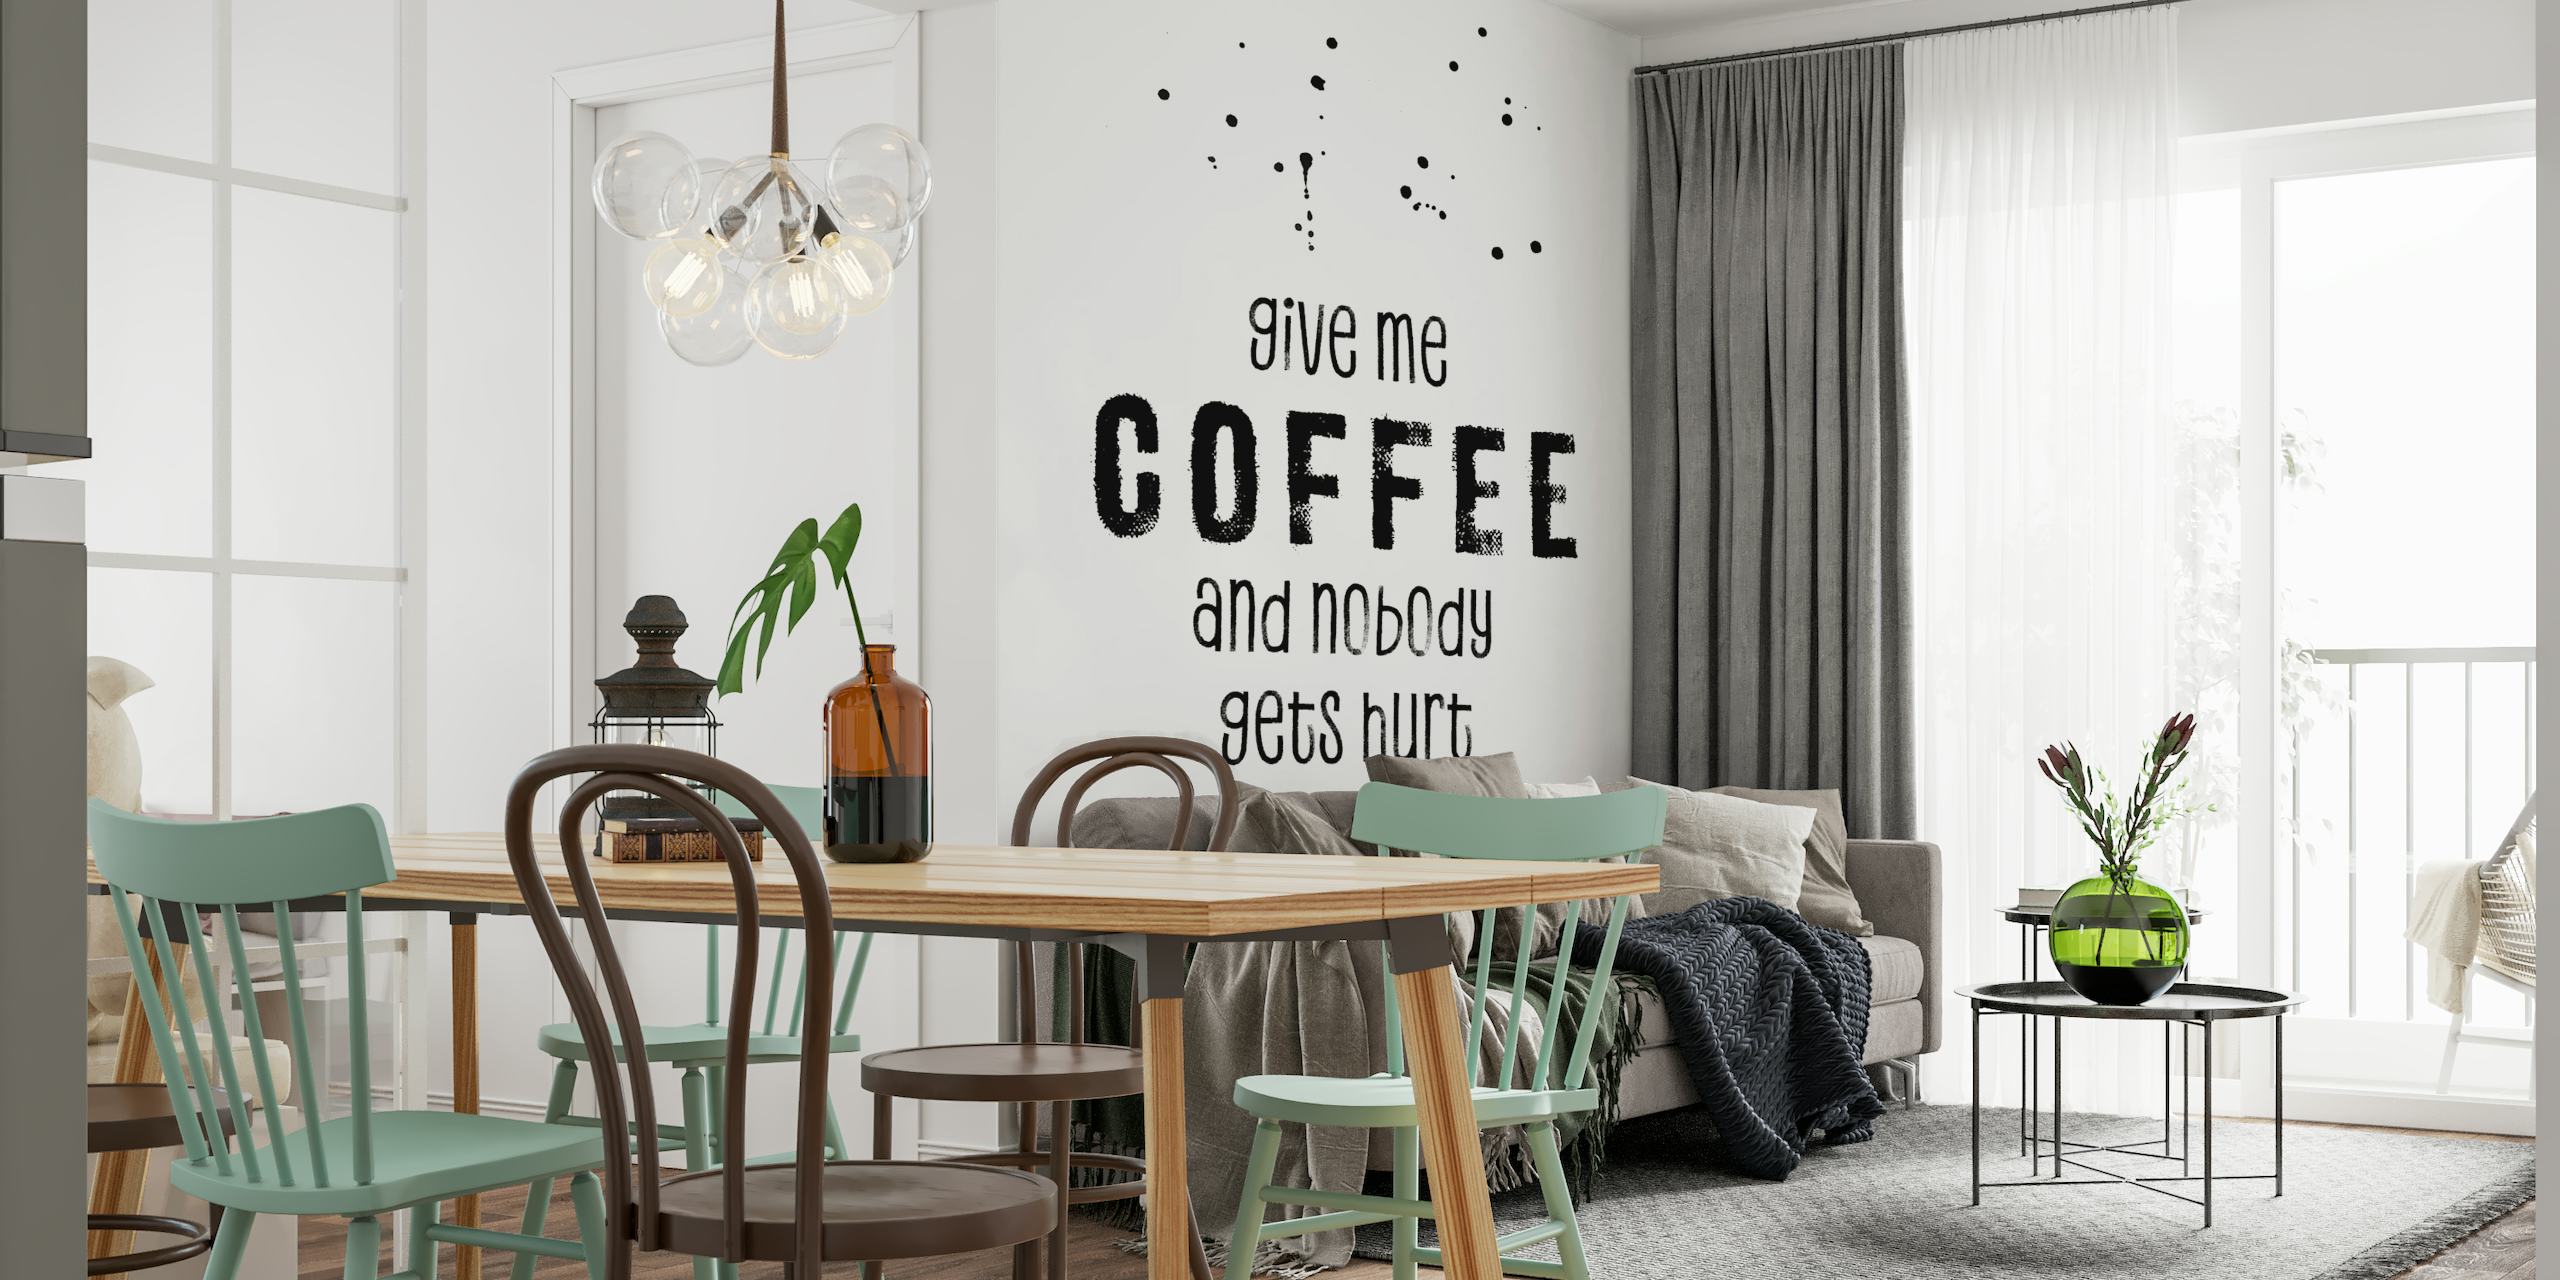 Give me coffee wallpaper